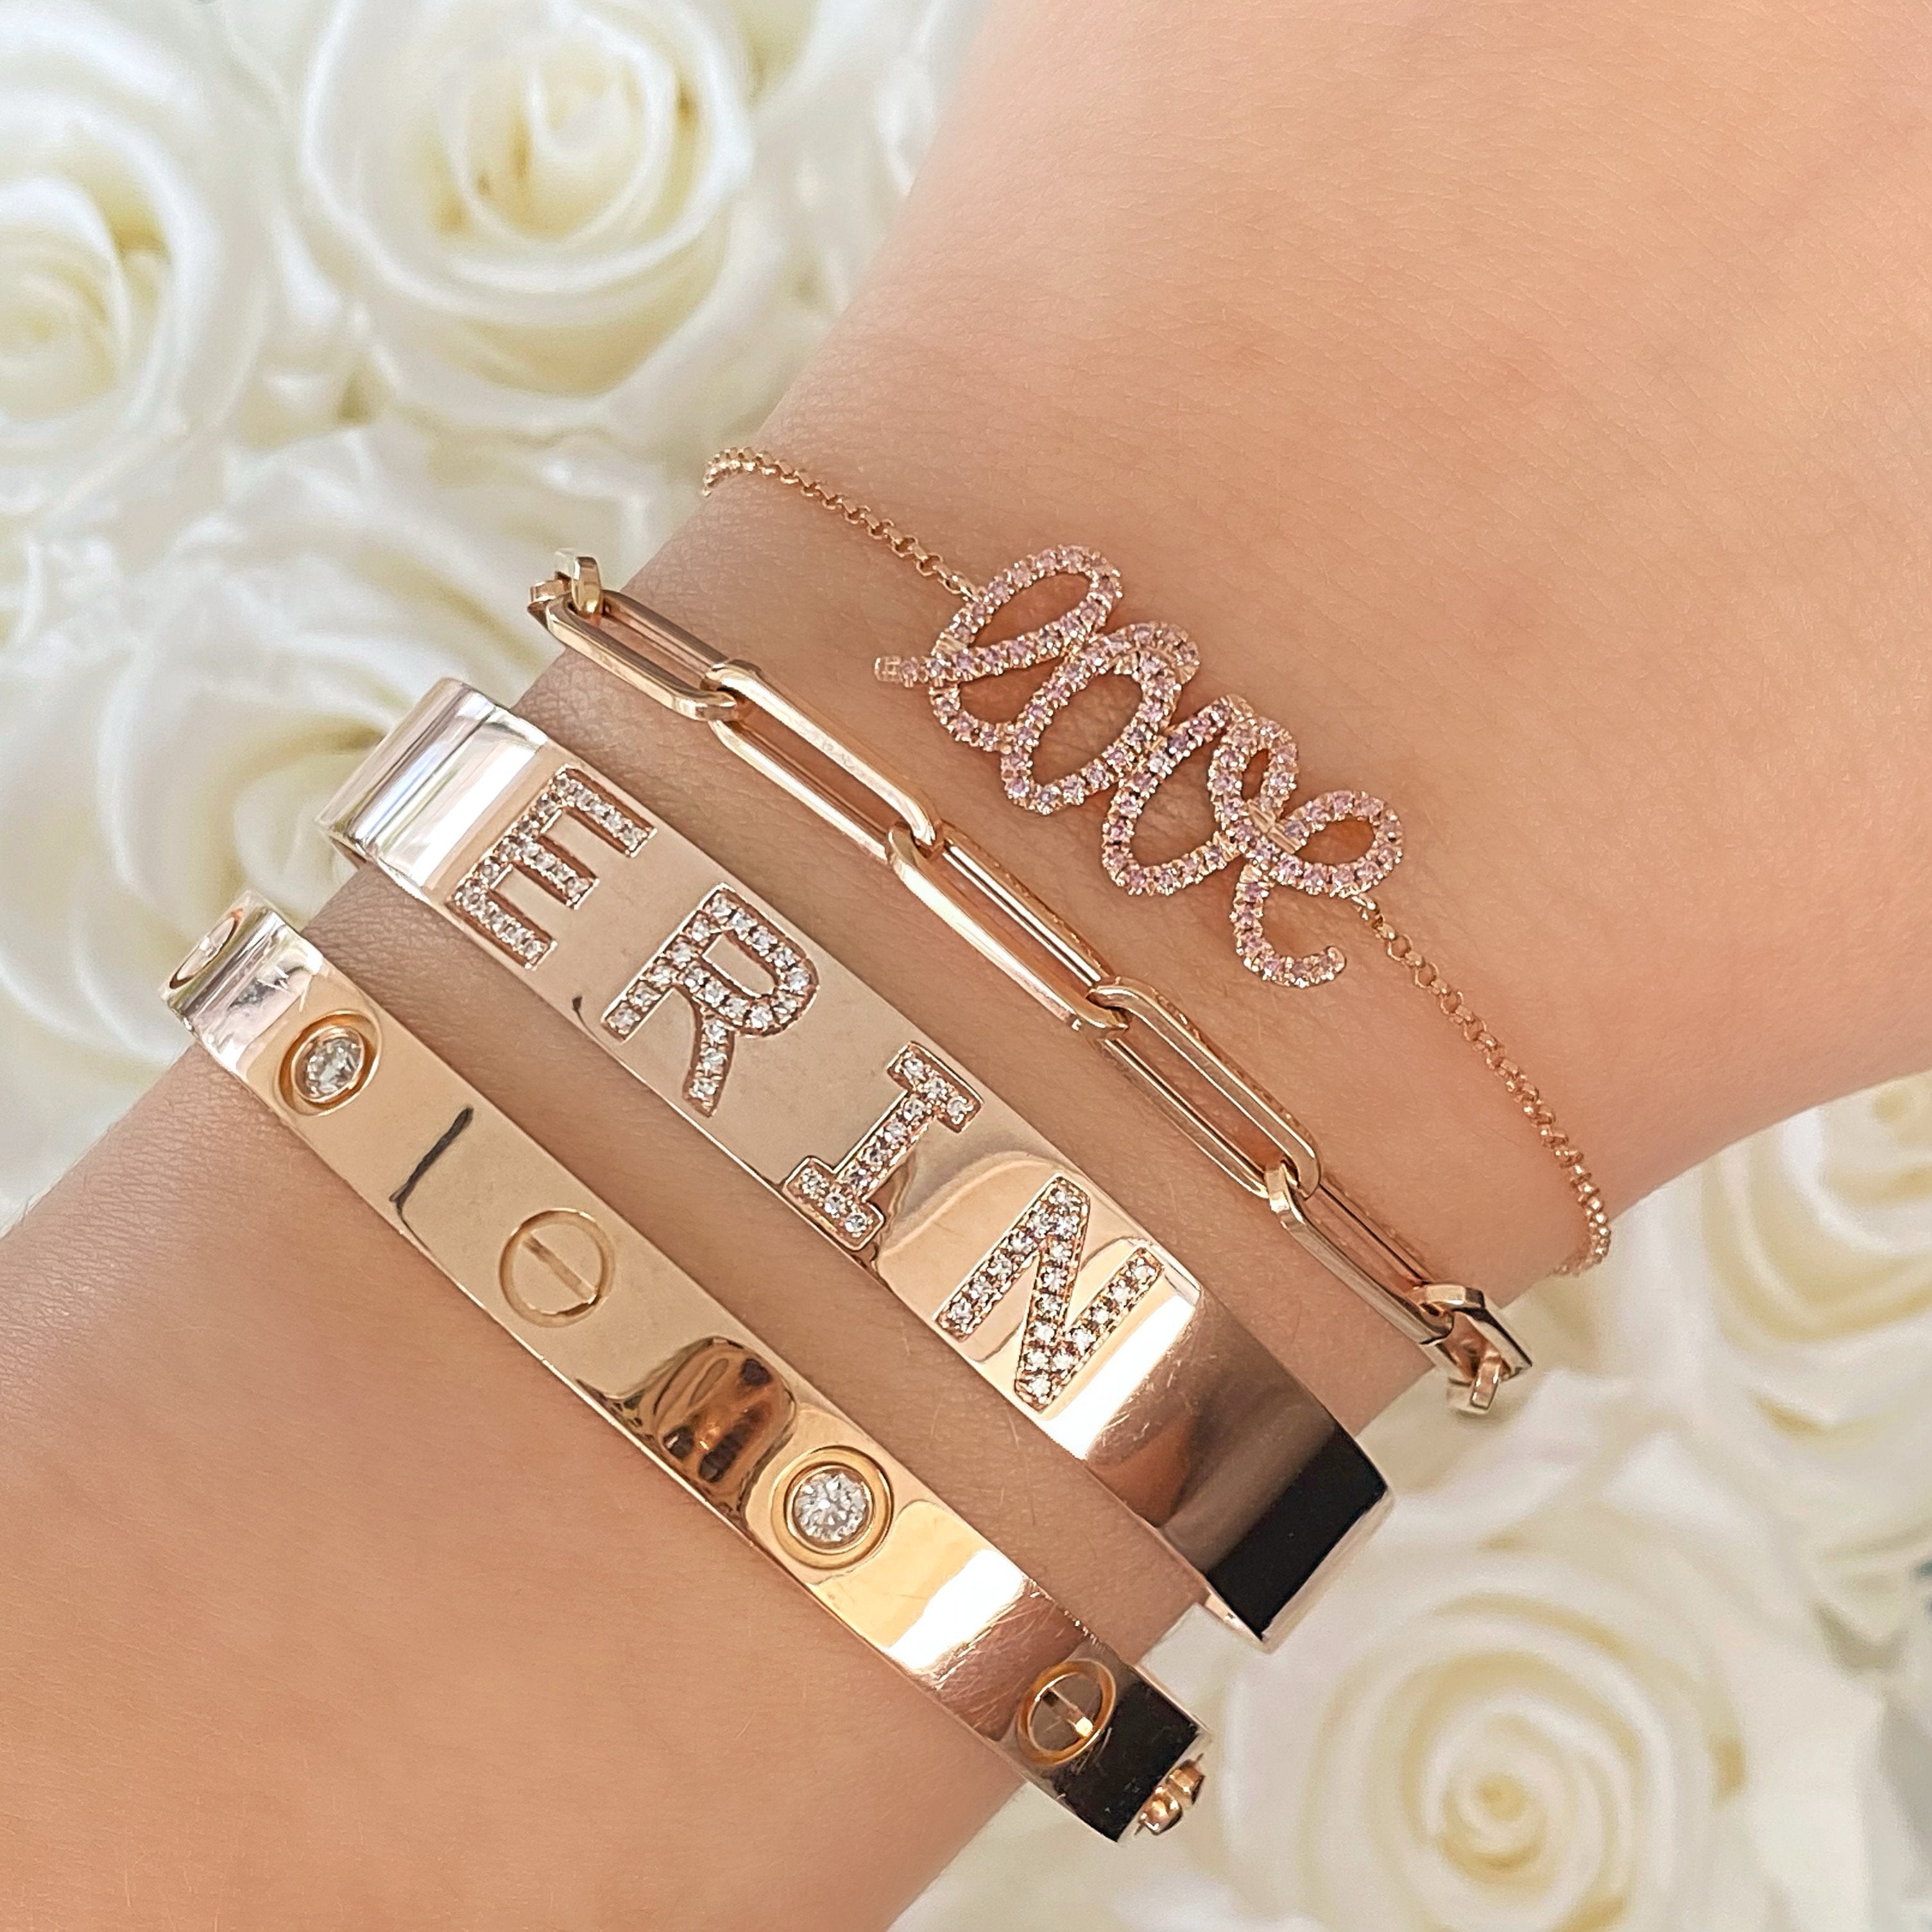 DOREMI Crystal Hollow Name Personalised Christening Bangle With Stone Bar  Customizable Personalized Bracelet For Actual Pictures 230822 From Jiao06,  $14.68 | DHgate.Com